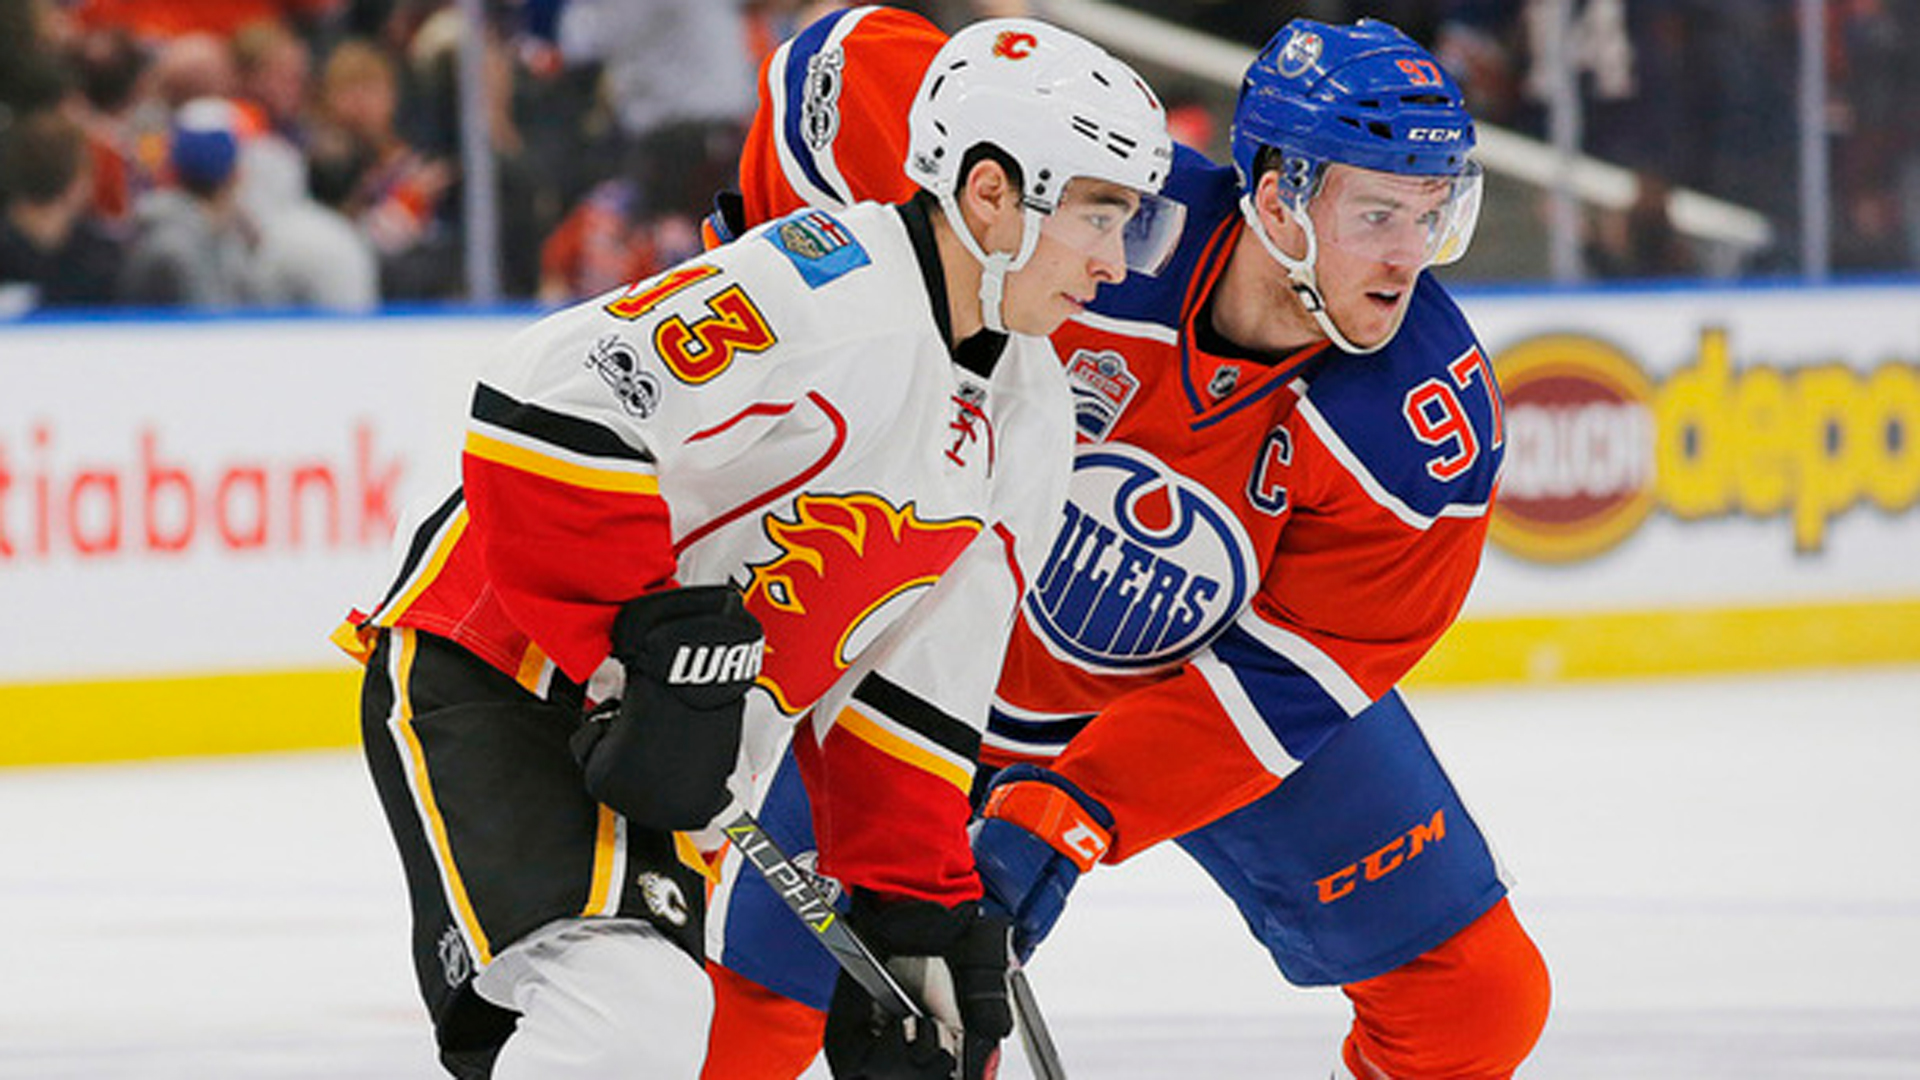 By the Numbers: Gaudreau vs. McDavid